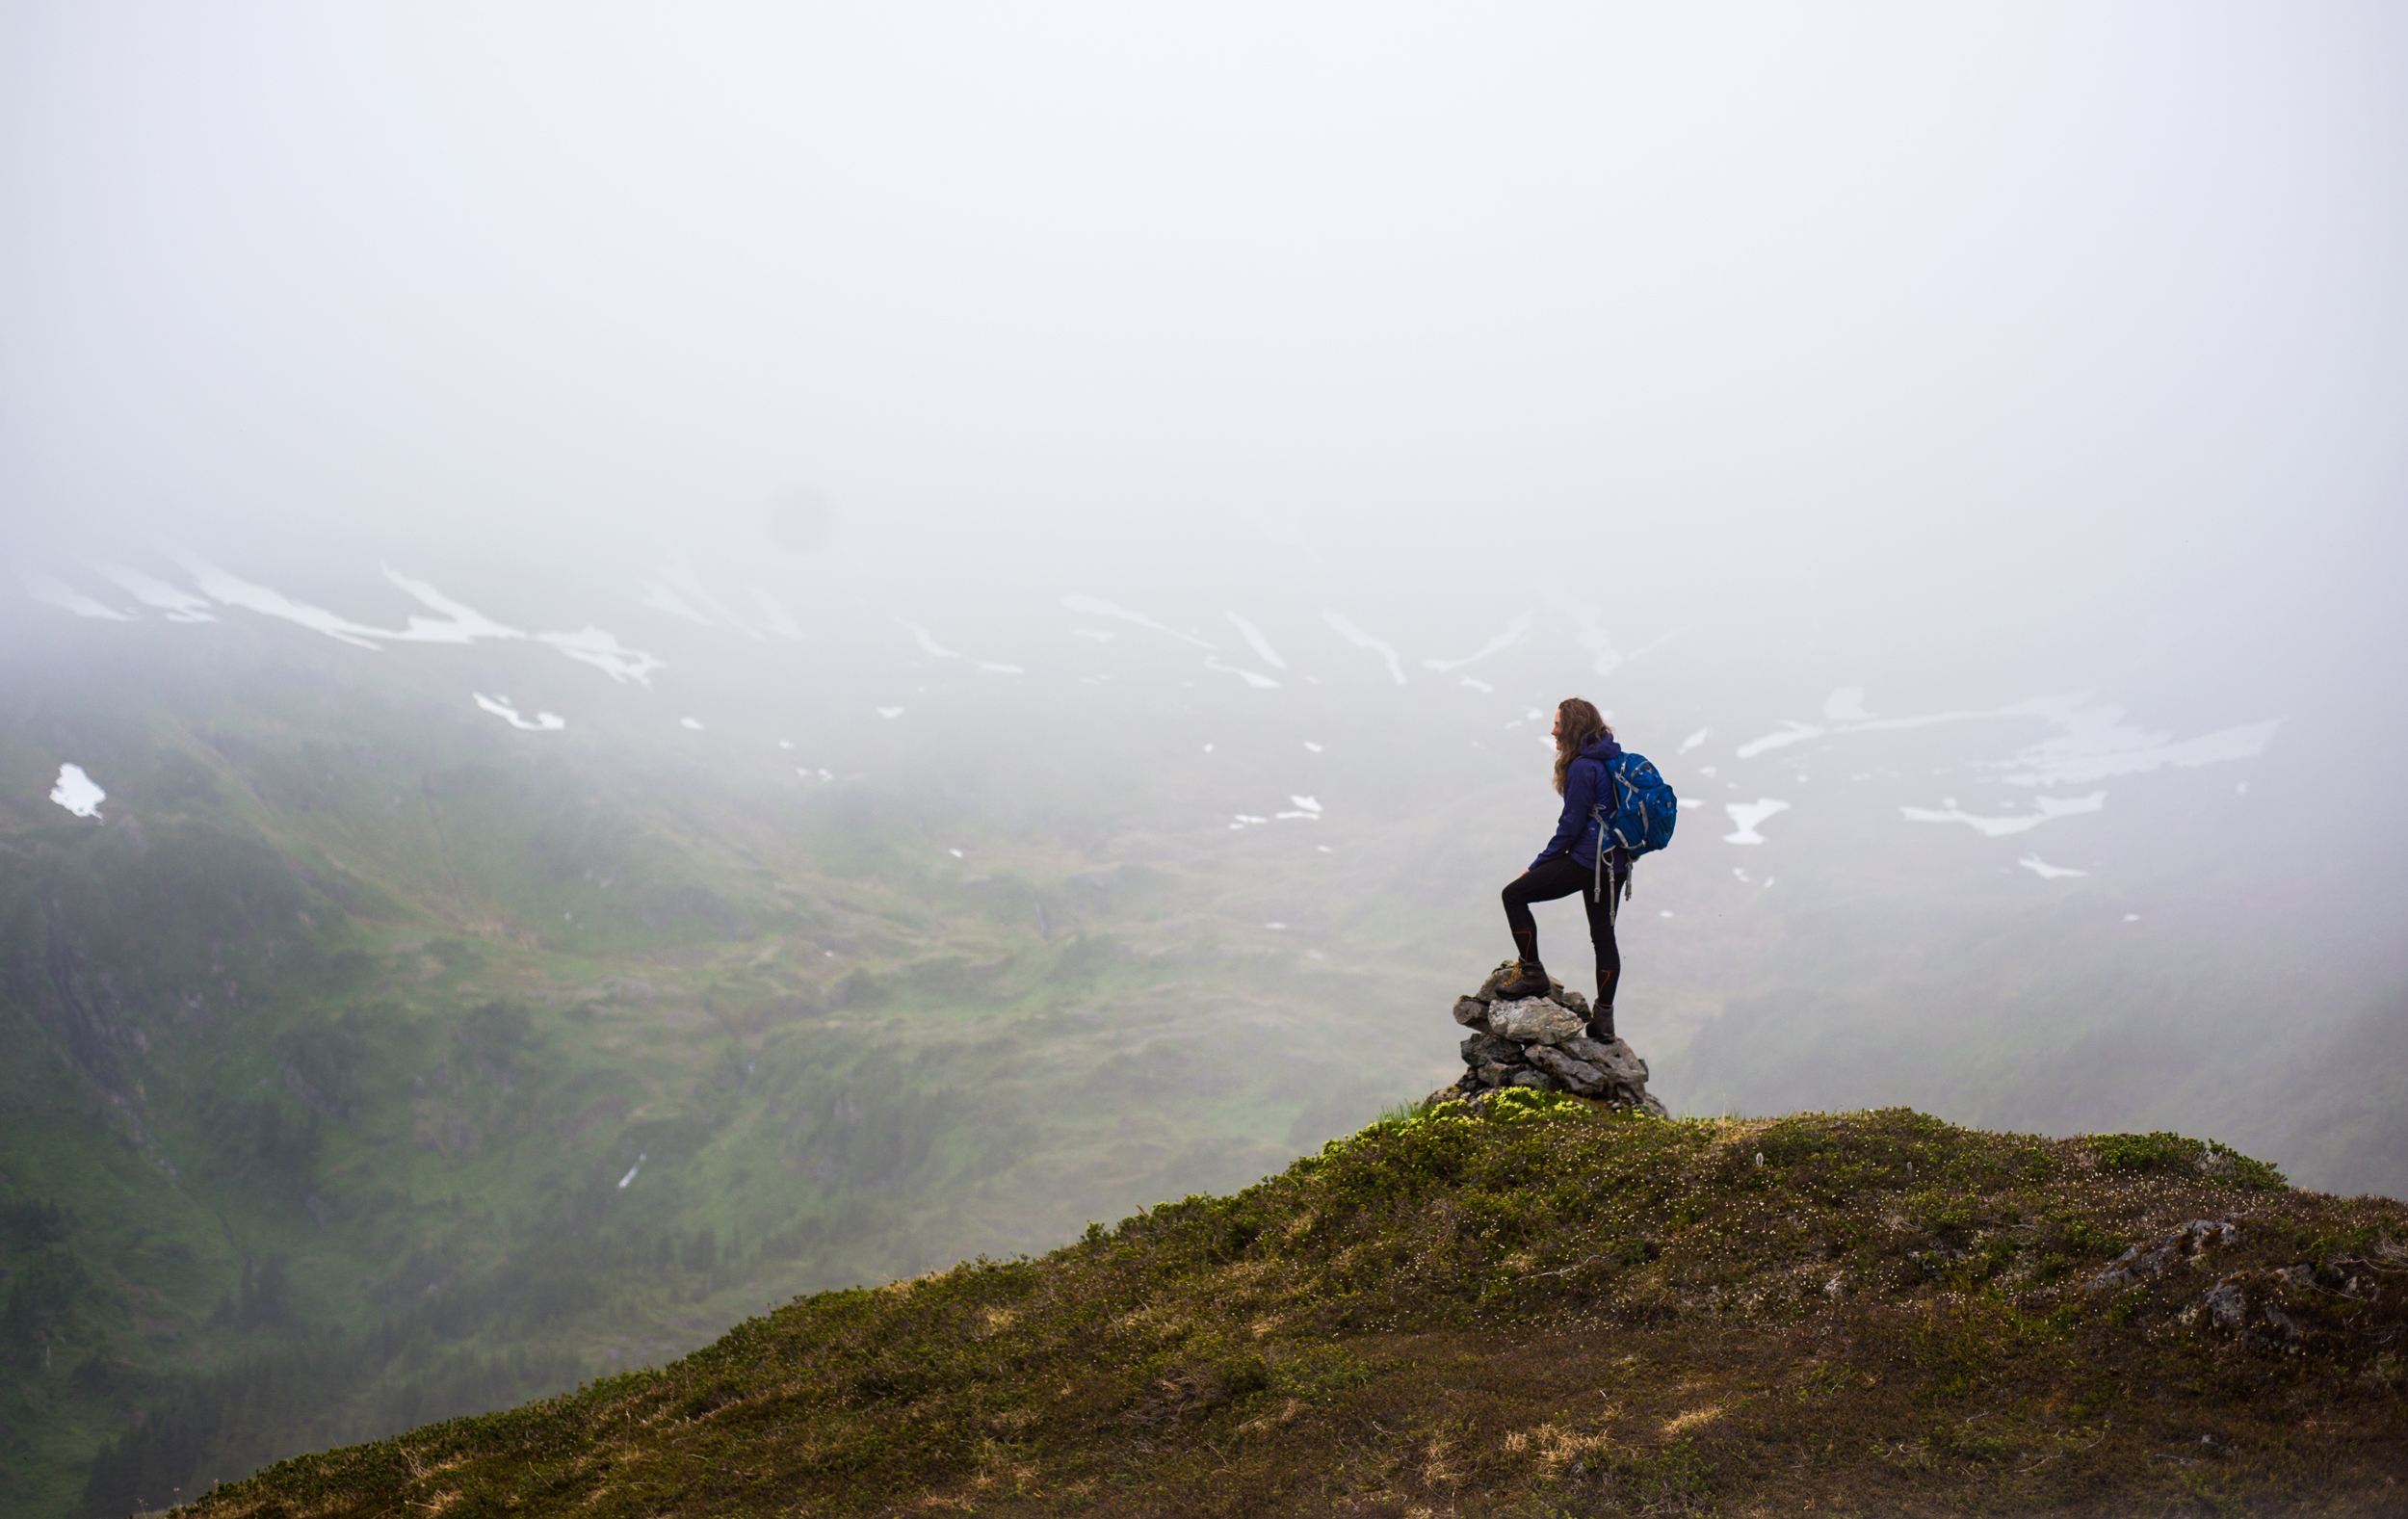  Camarata, who has lived and worked all over the lower forty-eight, has valued to her time in Alaska for pushing her to new extremes. On a day off surveying, we took a hike up Sheridan Mountain and talked about what the future looked like for the bot